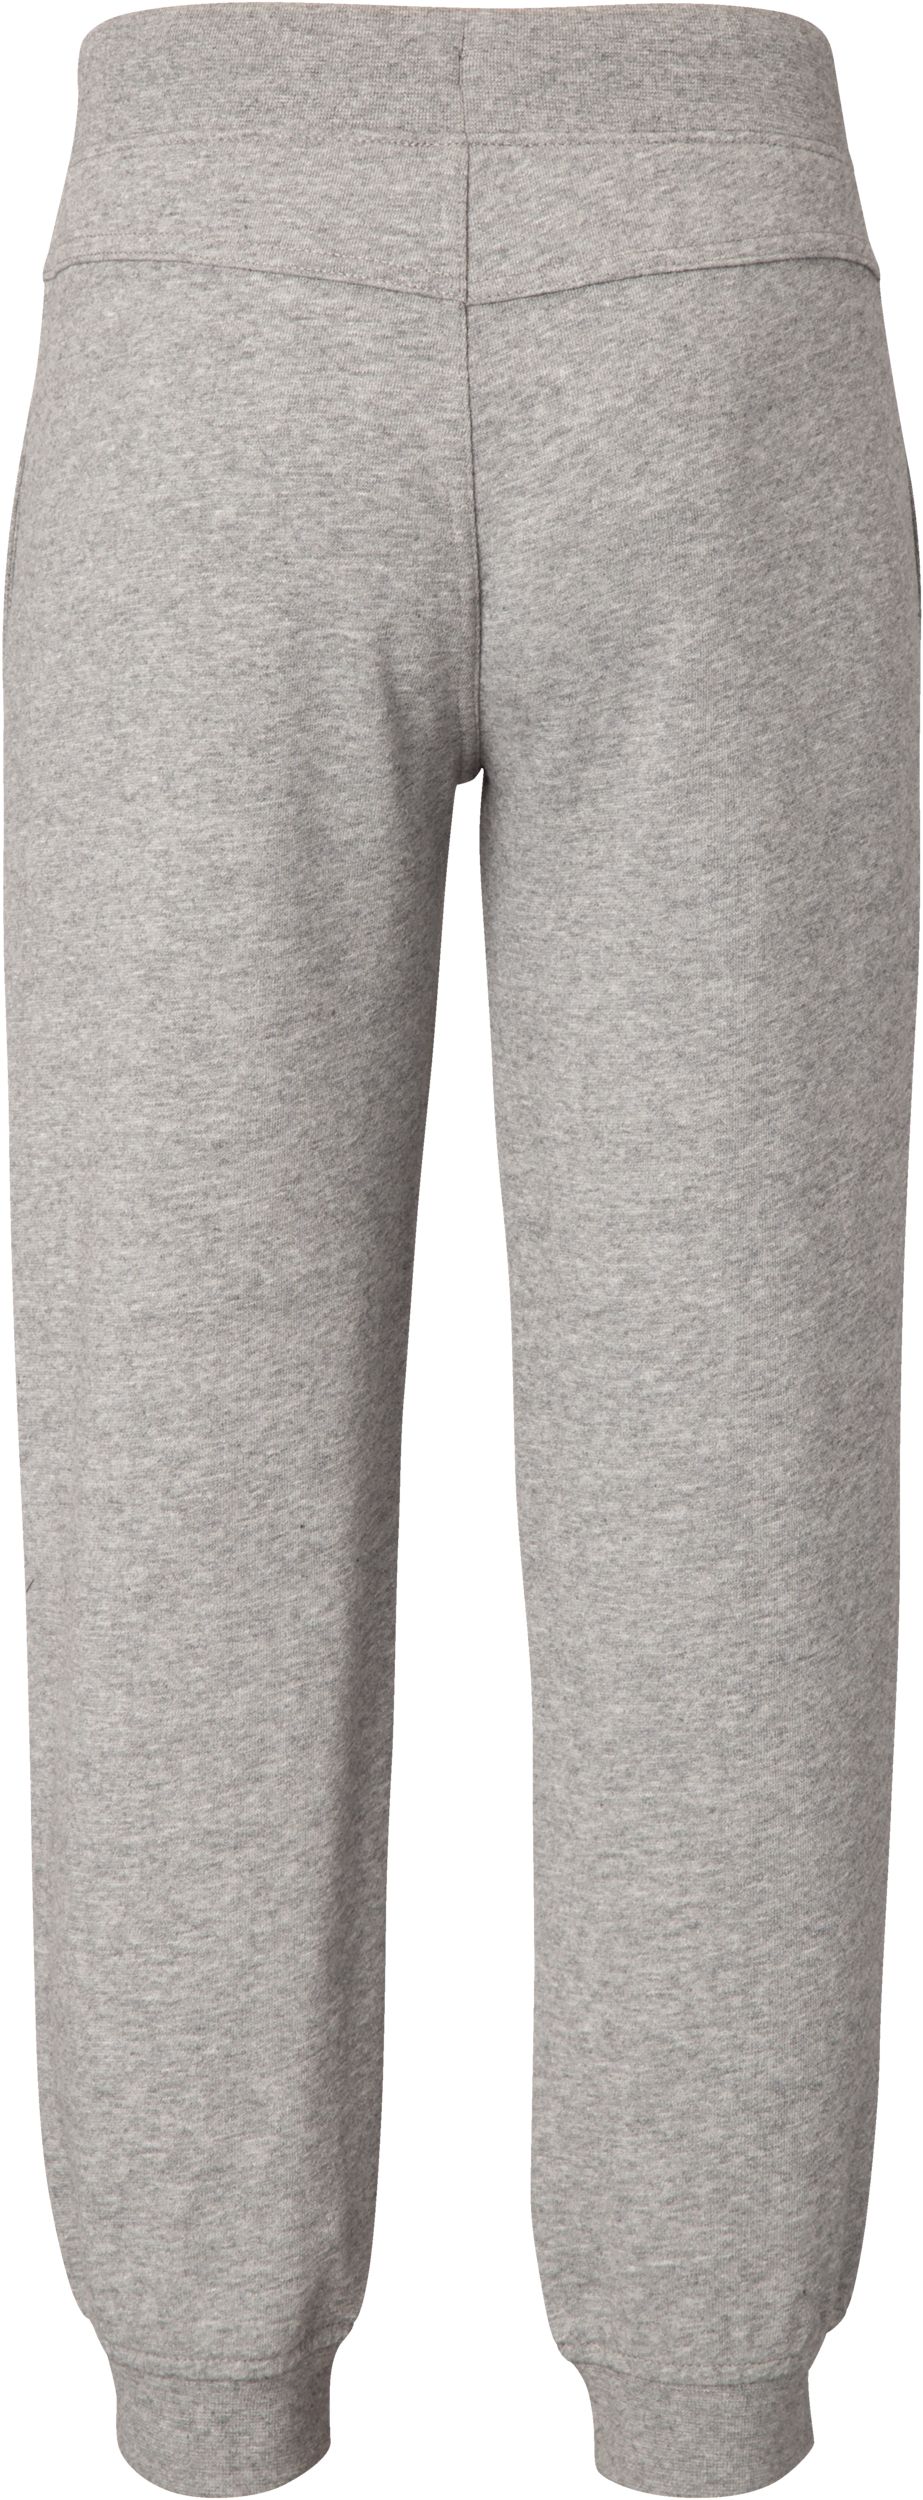 Ripzone Girls' Veil French Terry Sweat Sweatpants, Kids', Cuffed, Tapered,  Casual